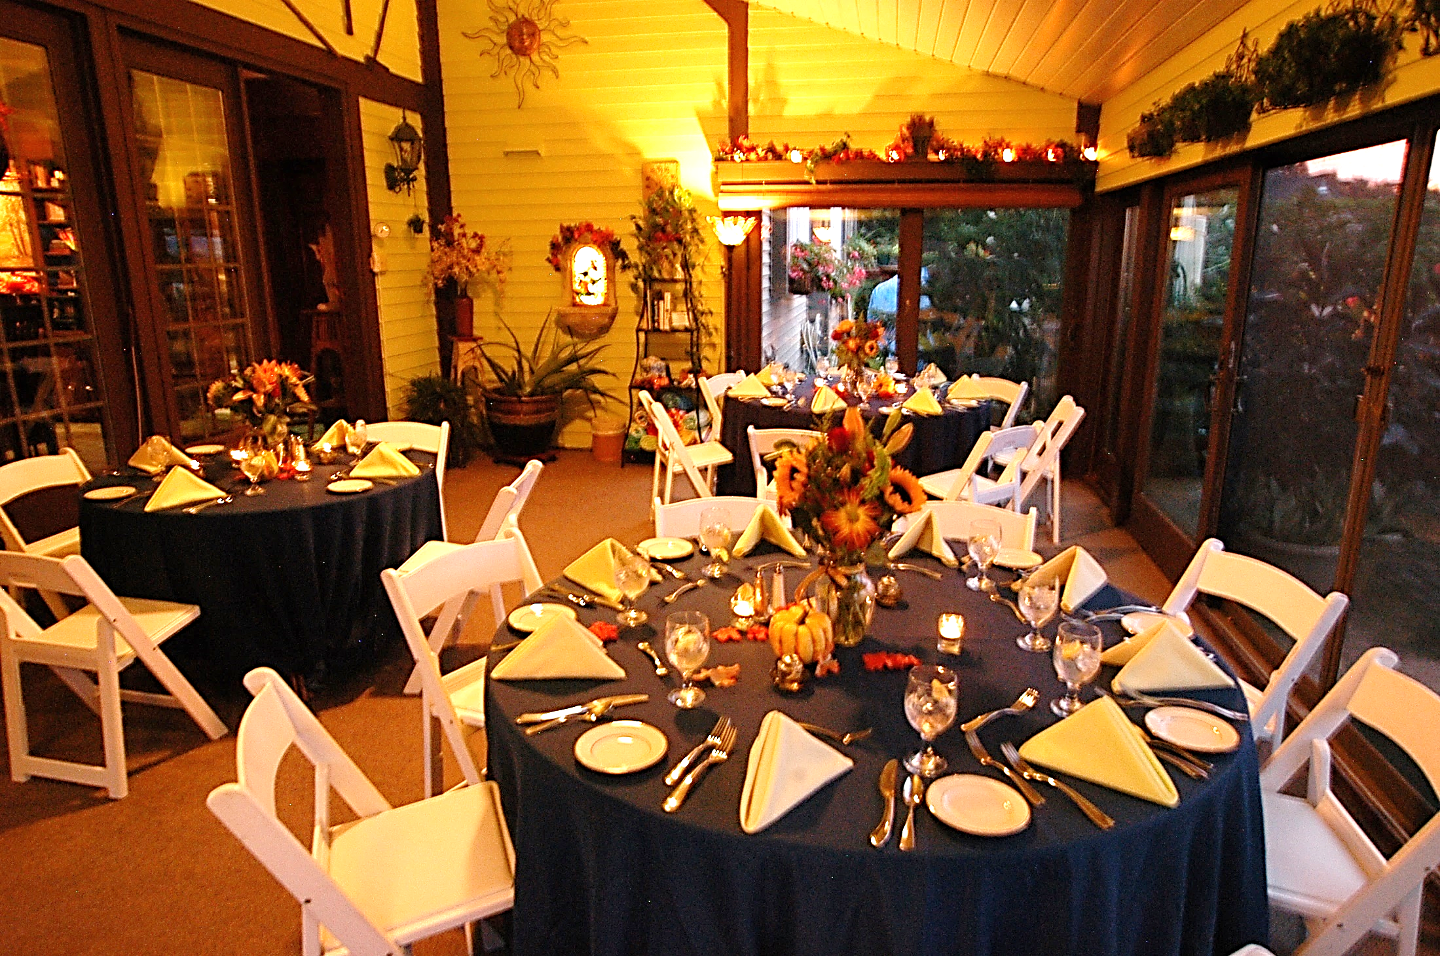 Annville Inn's Garden Room reset to have three round tables set up with eight place settings each for a catered dinner during a reunion.